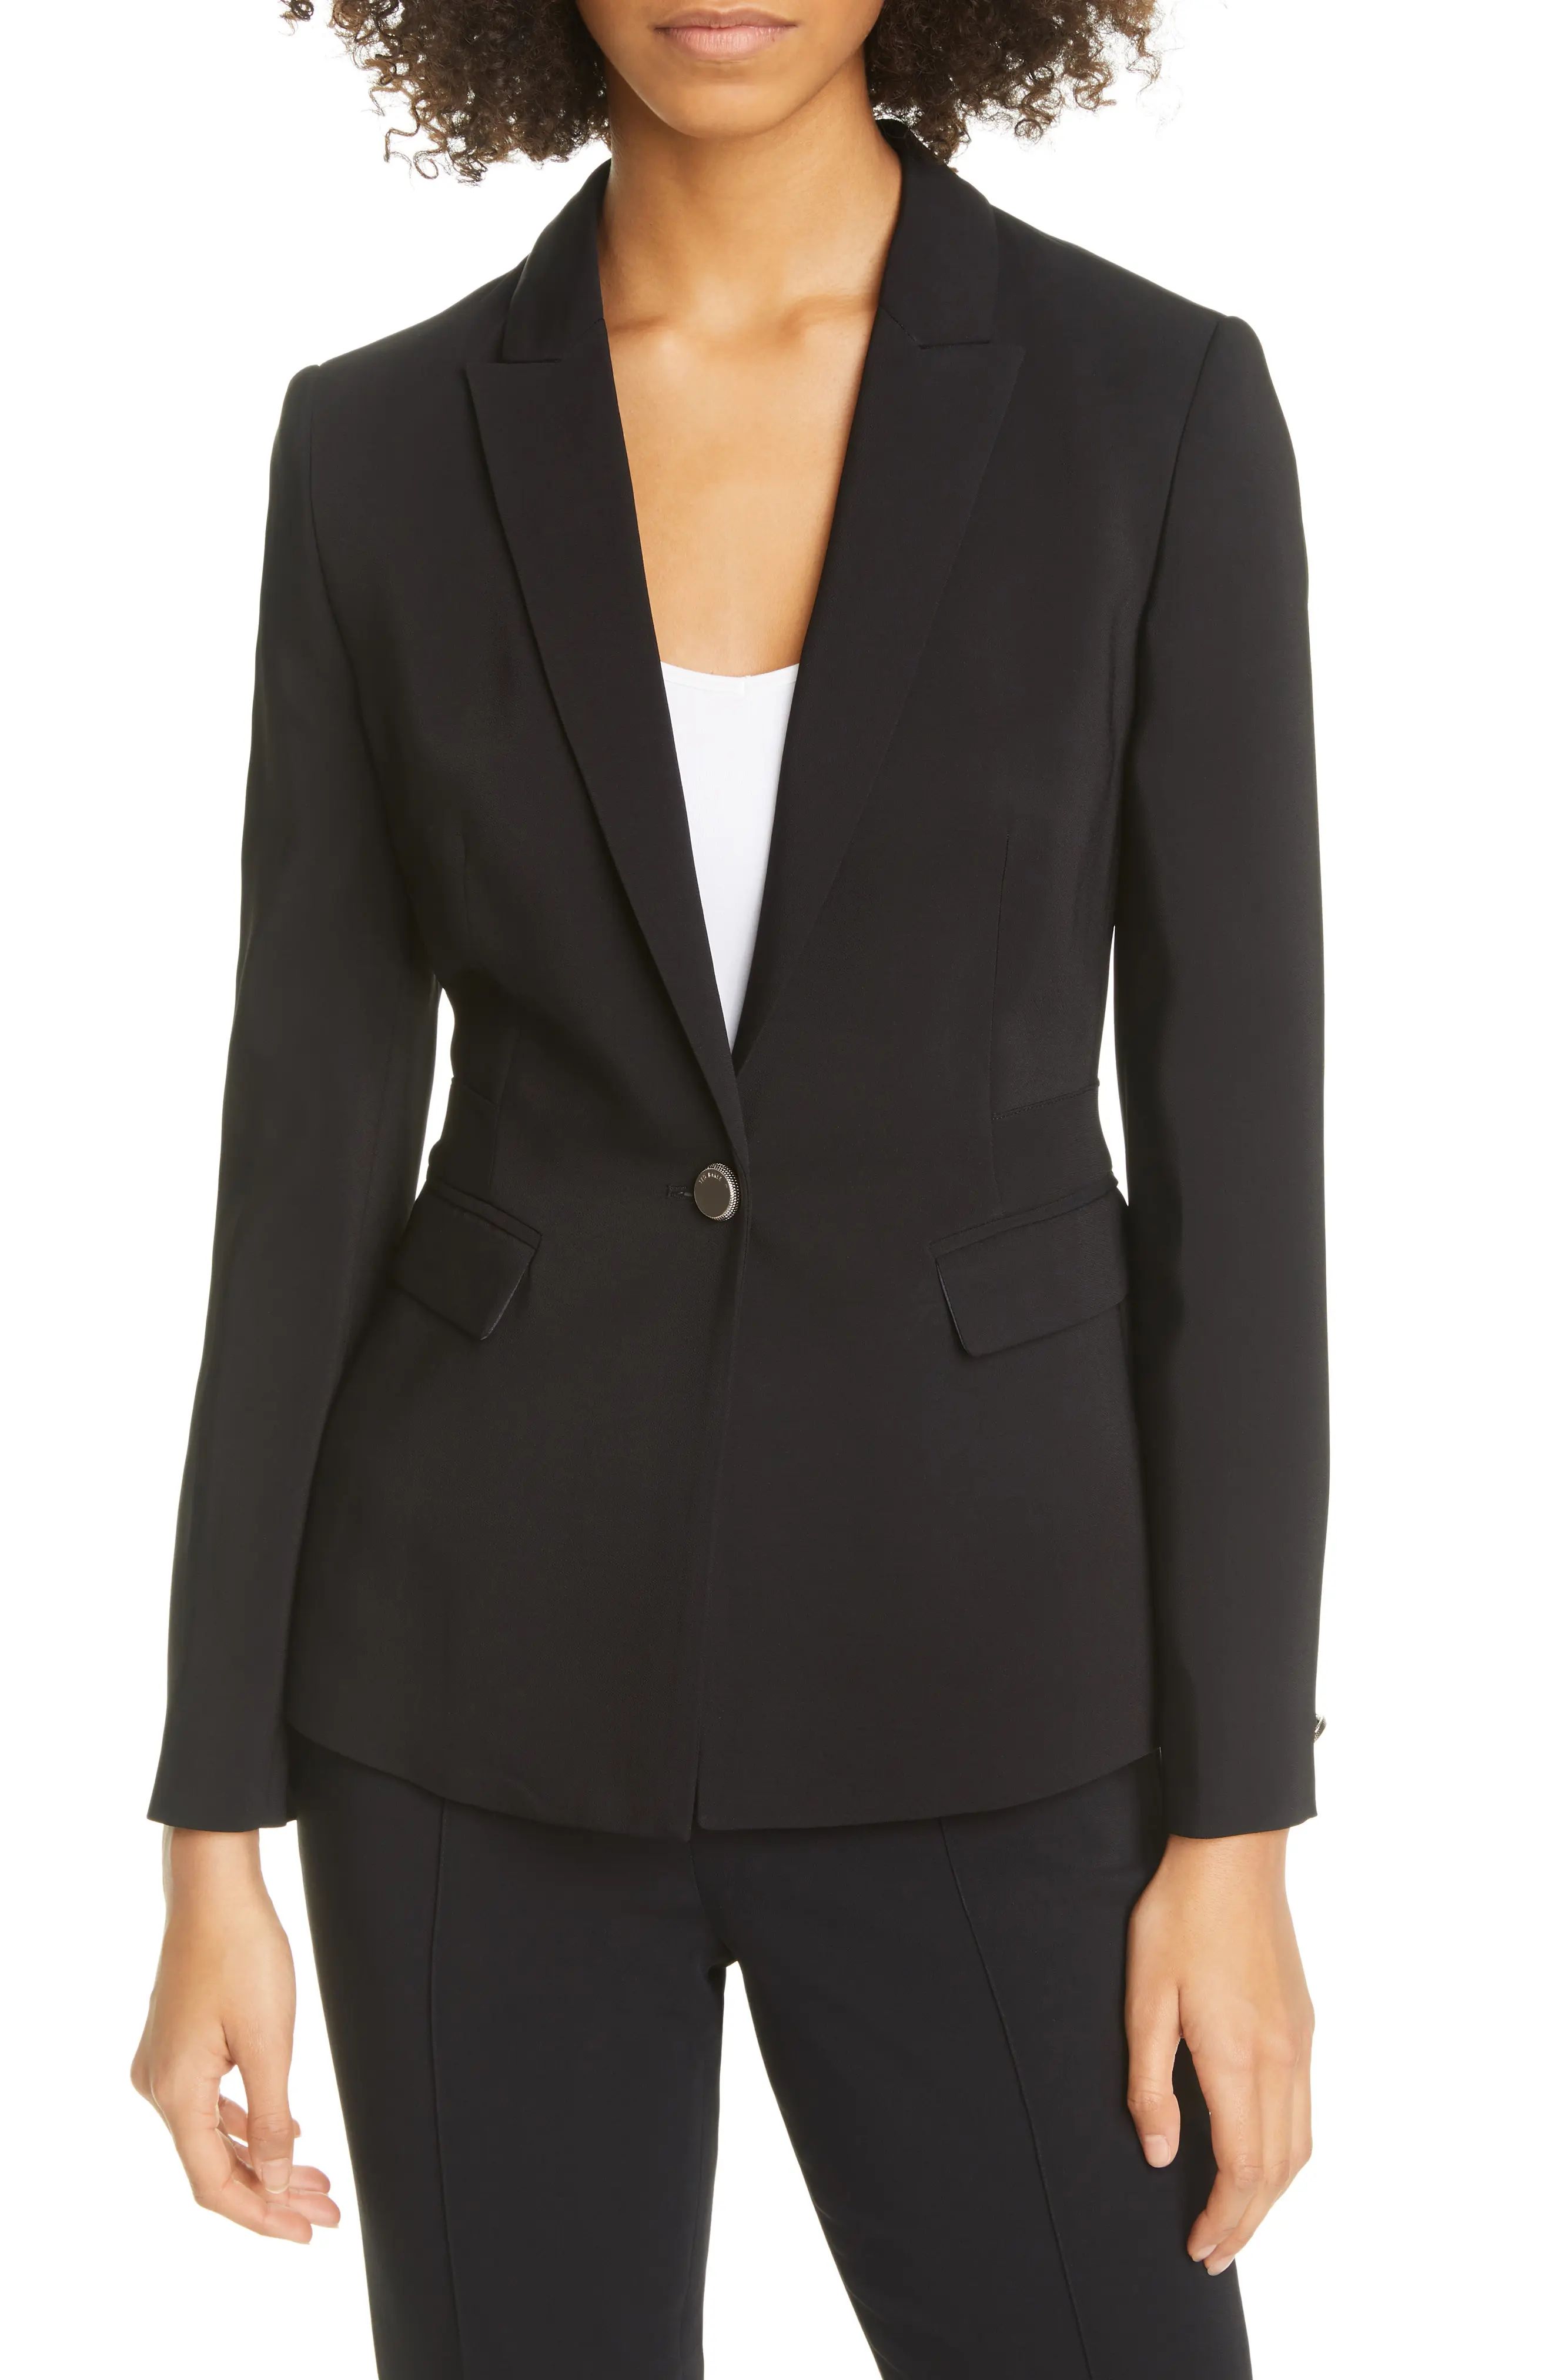 Women's Ted Baker London Raee One-Button Blazer, Size 1 (fits like 0-2 US) - Black | Nordstrom